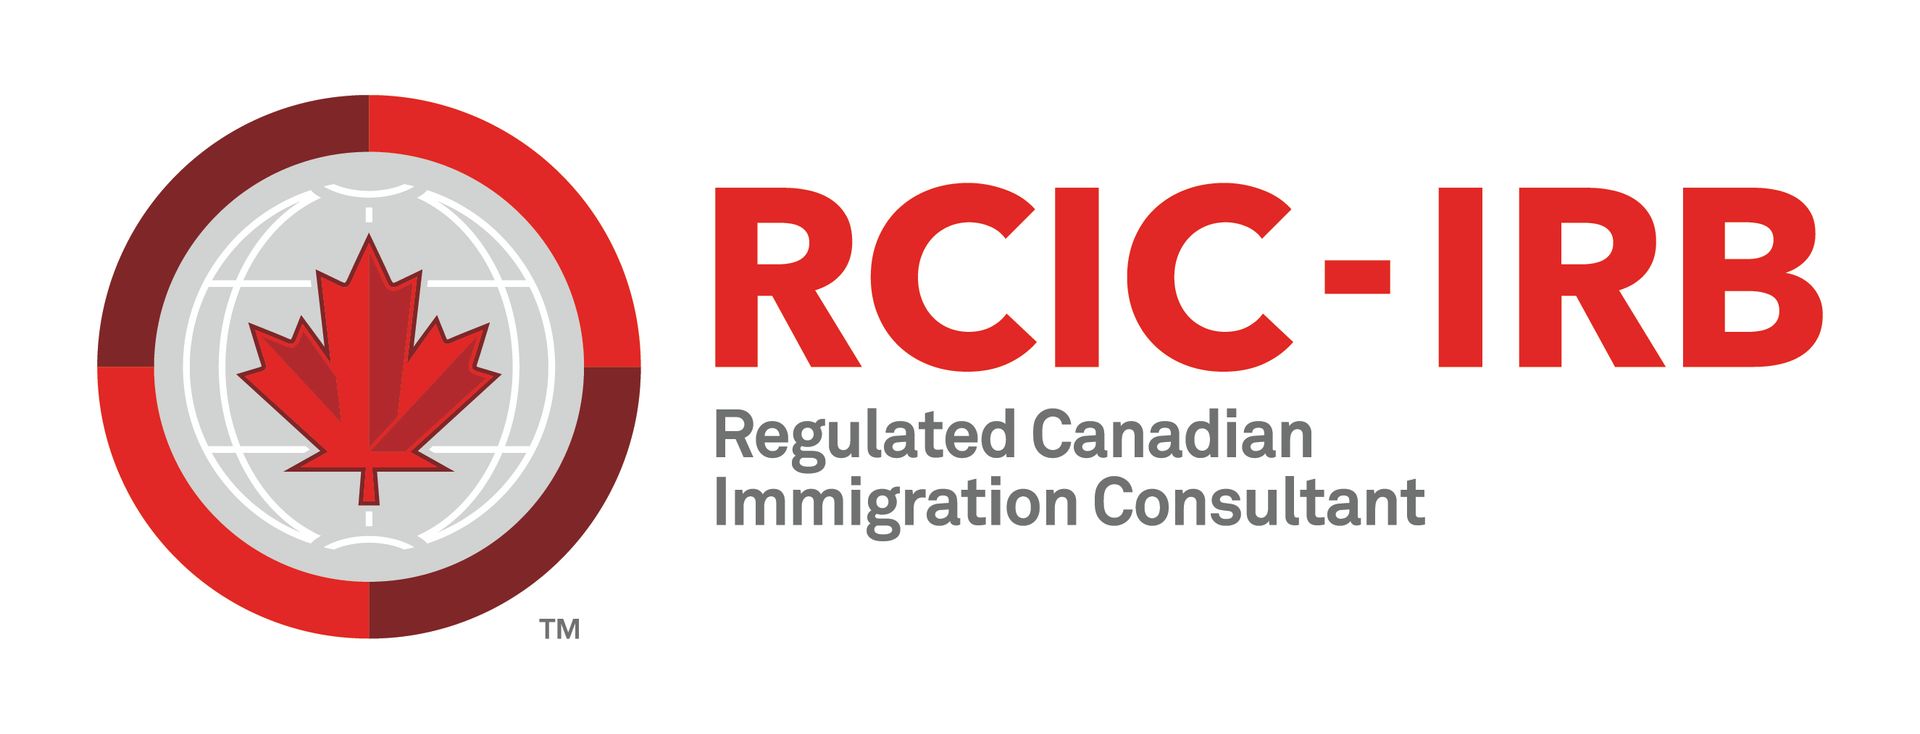 rcic-croc logo for egdal immigration consulting alberta